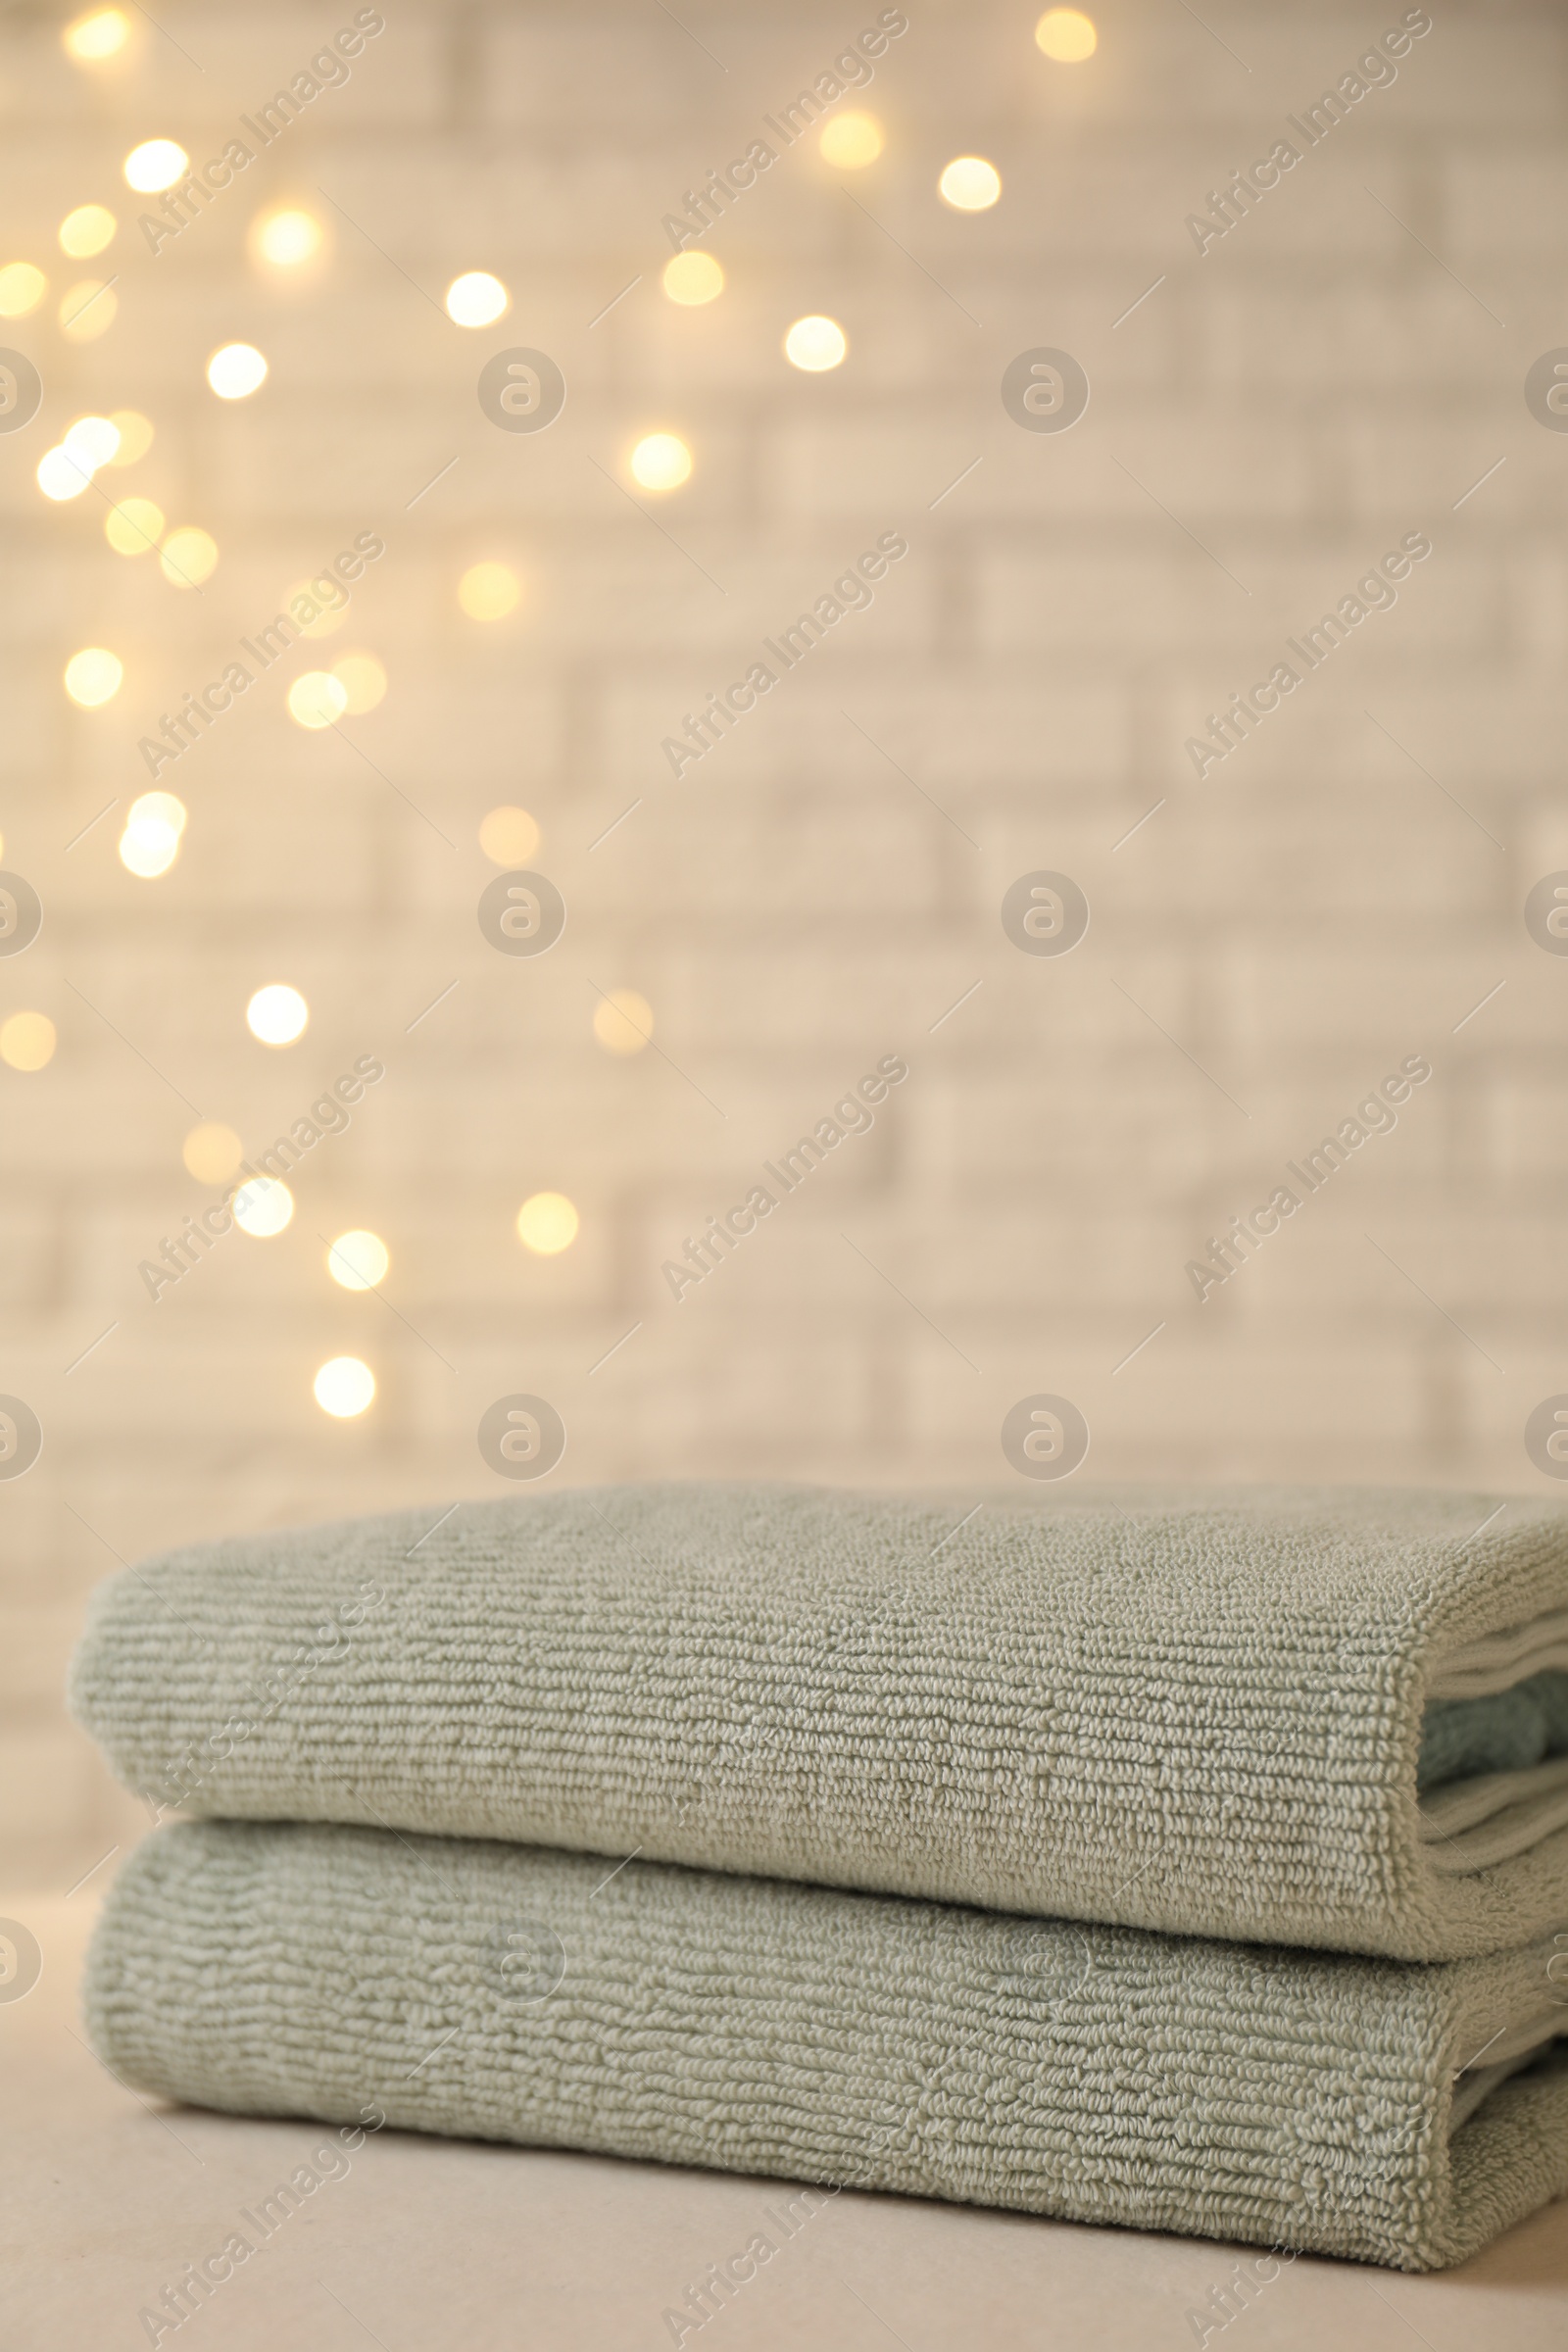 Photo of Stacked soft towels on white table near brick wall indoors, closeup. Space for text